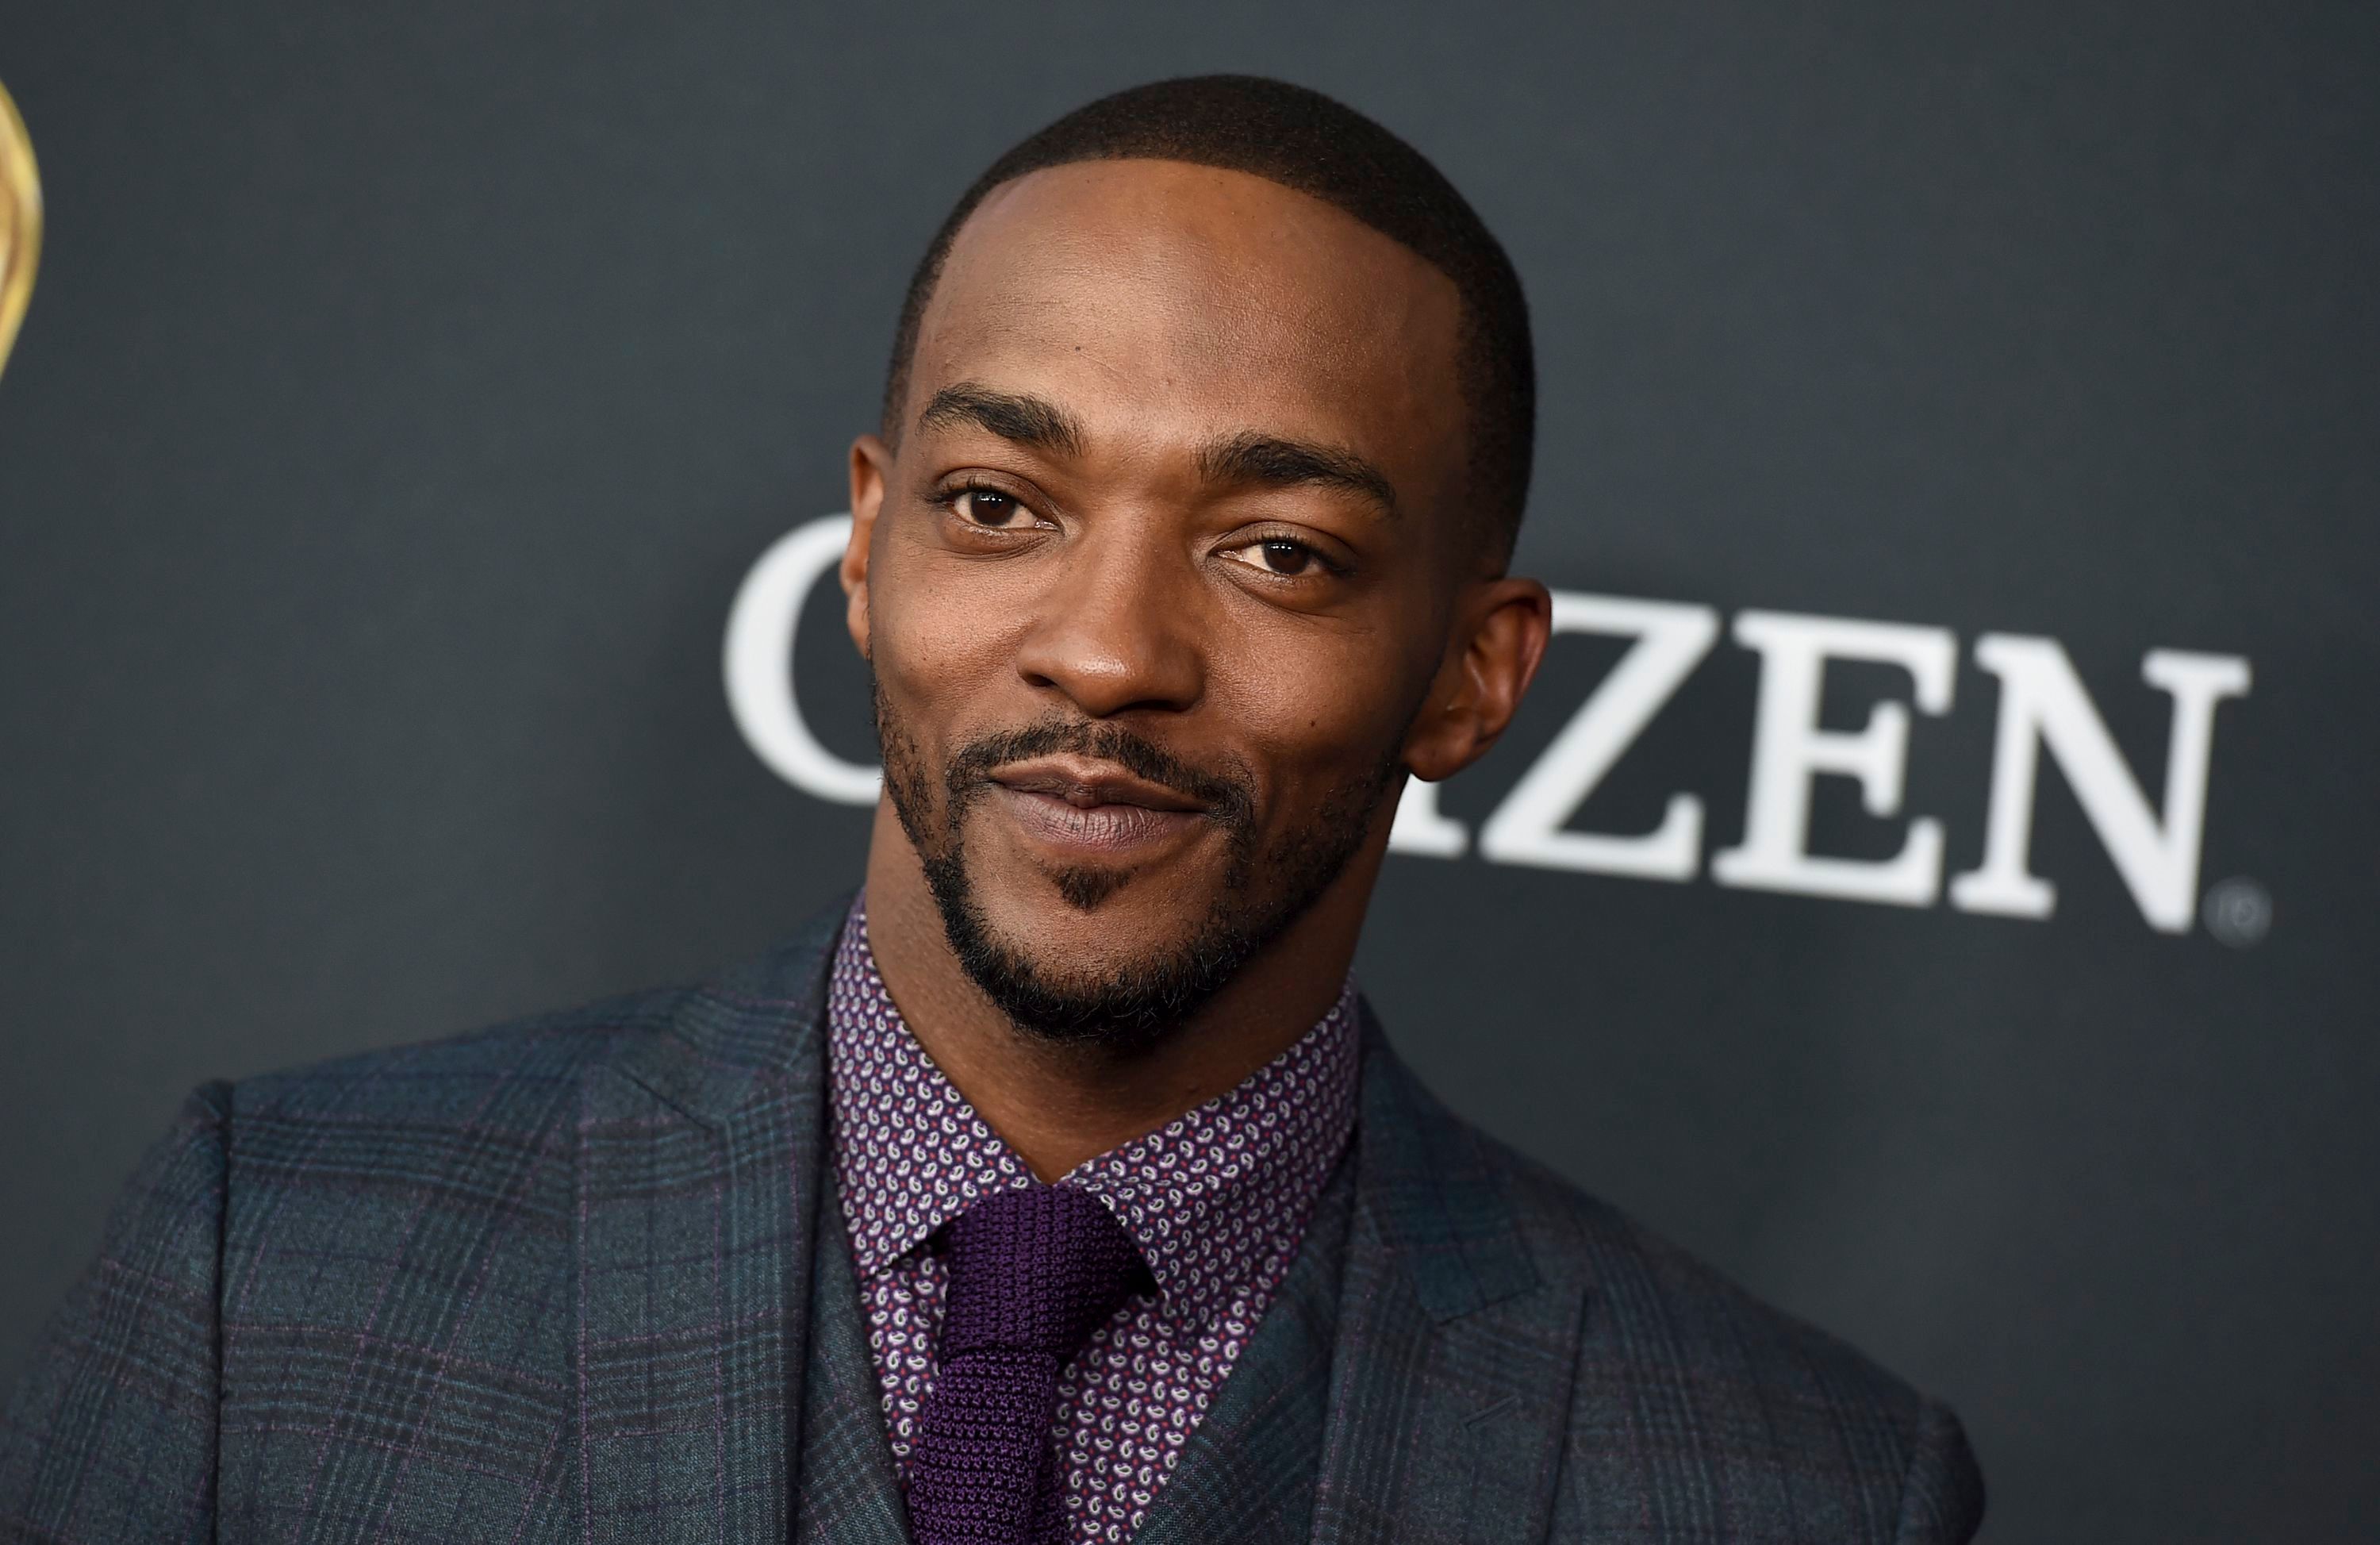 34 Facts about Anthony Mackie - Facts.net